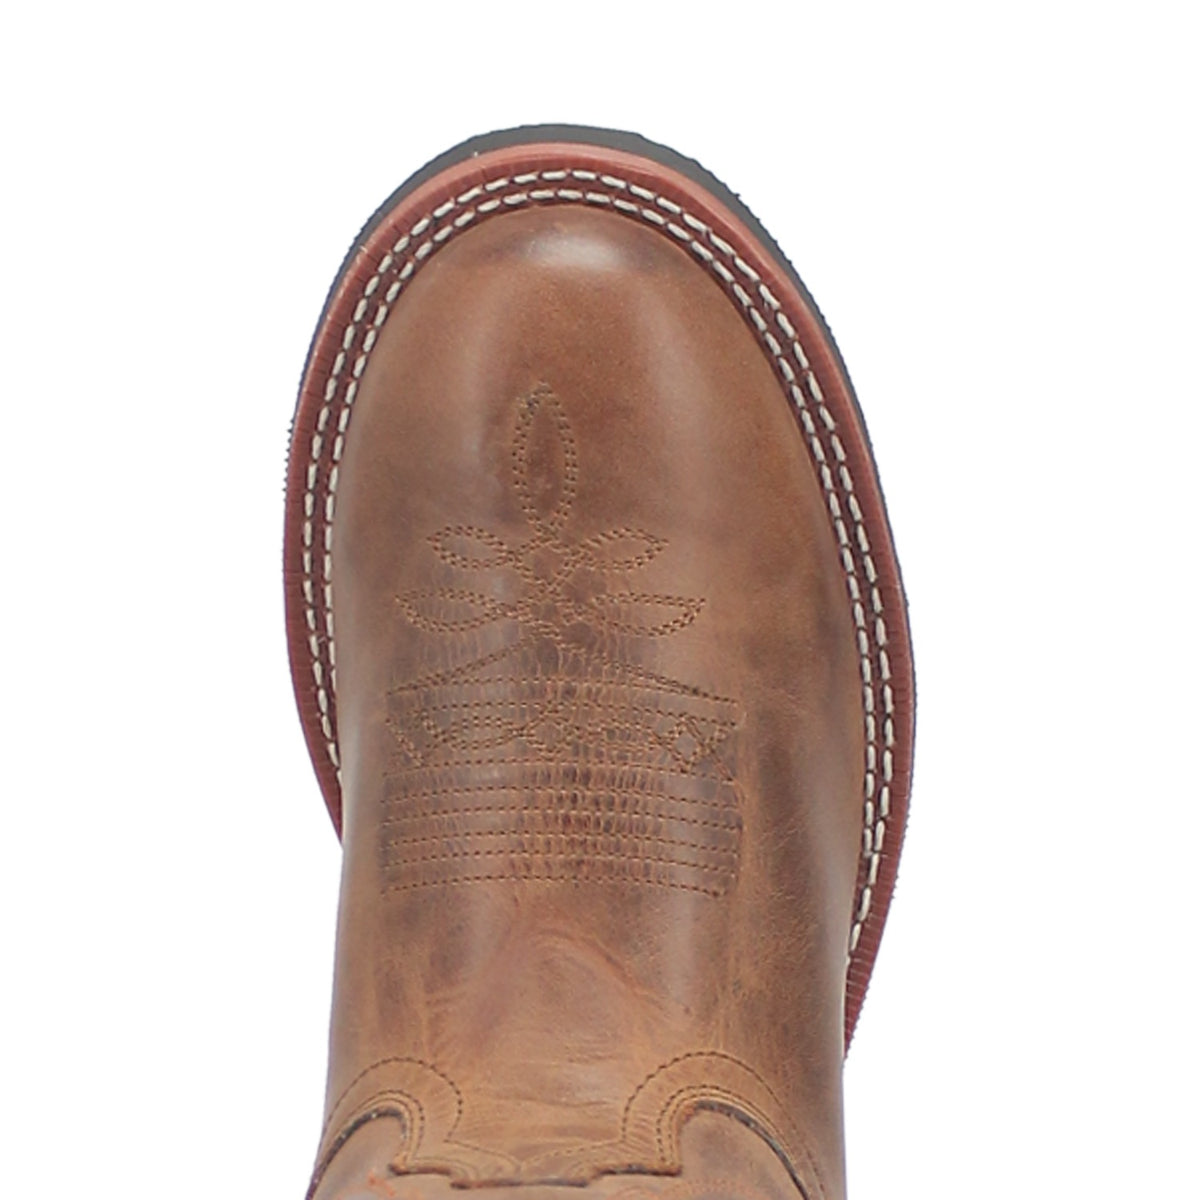 COMBS LEATHER BOOT Cover